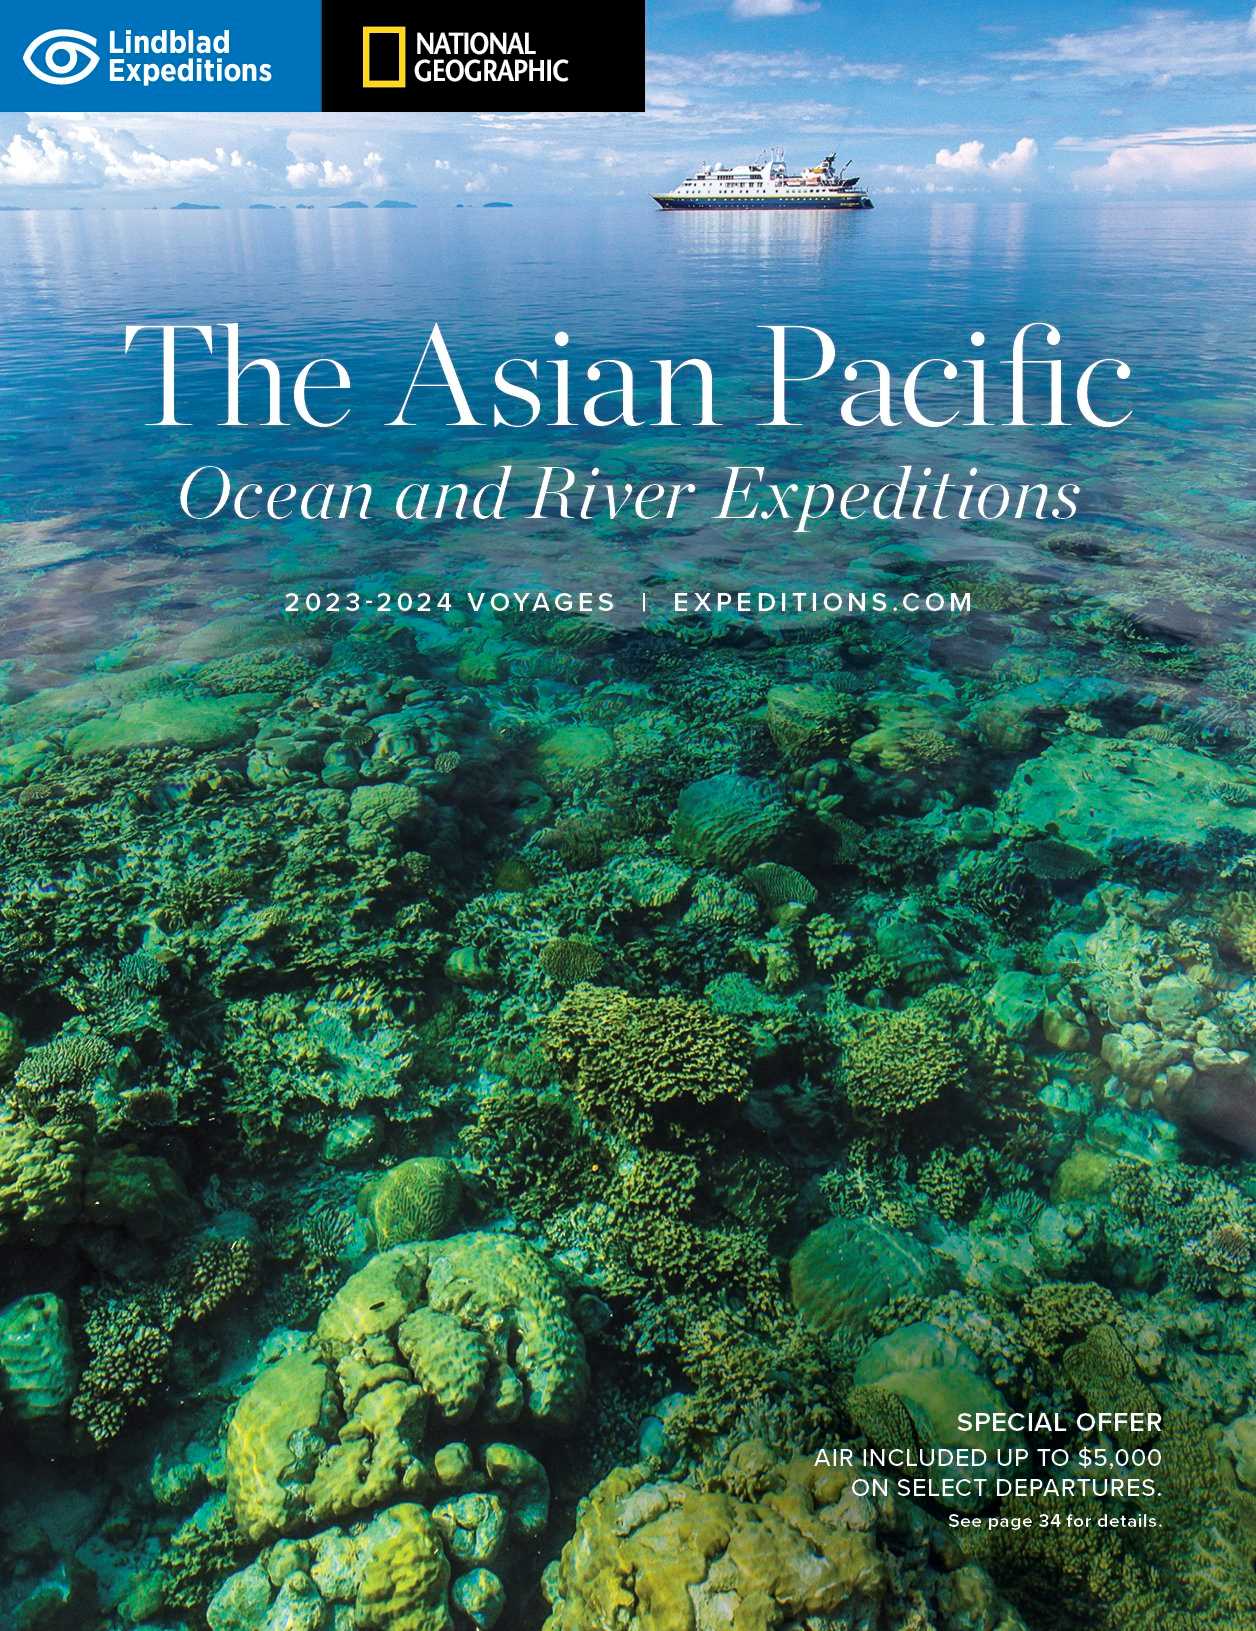 The Asian Pacific 2023-24